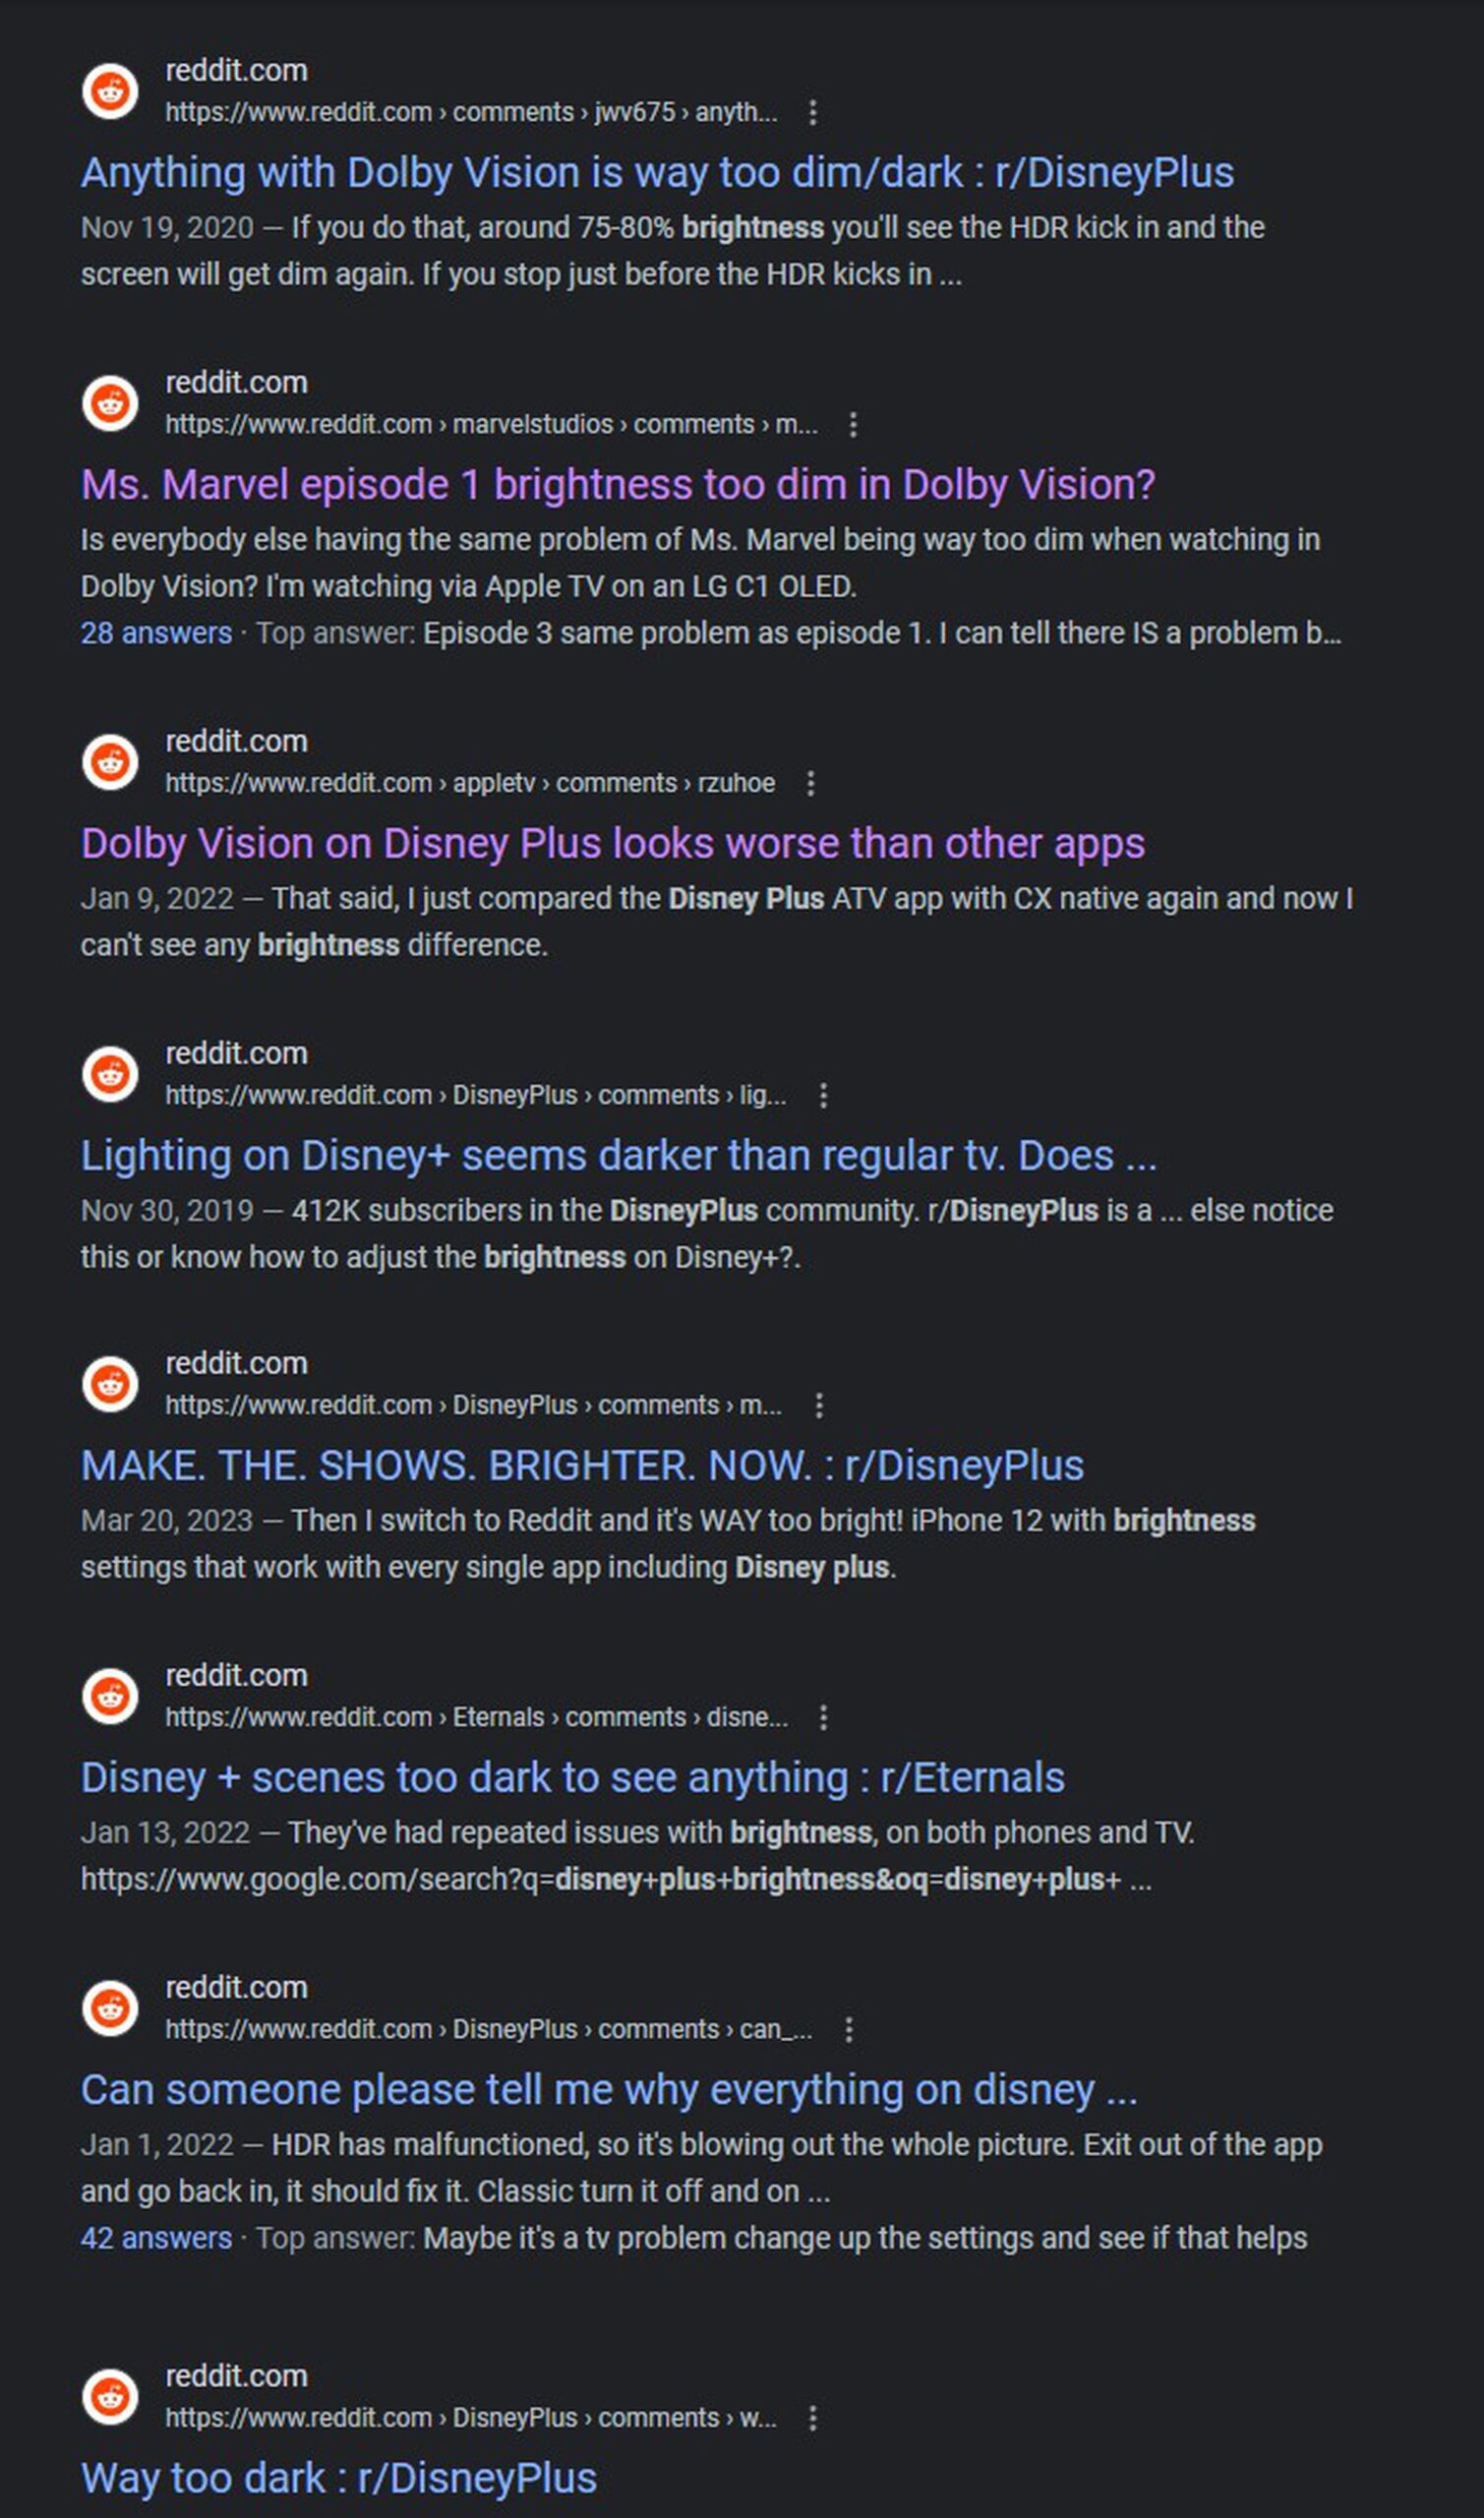 Screenshot showing several Google search results with reddit posts complaining about the brightness on Disney Plus.